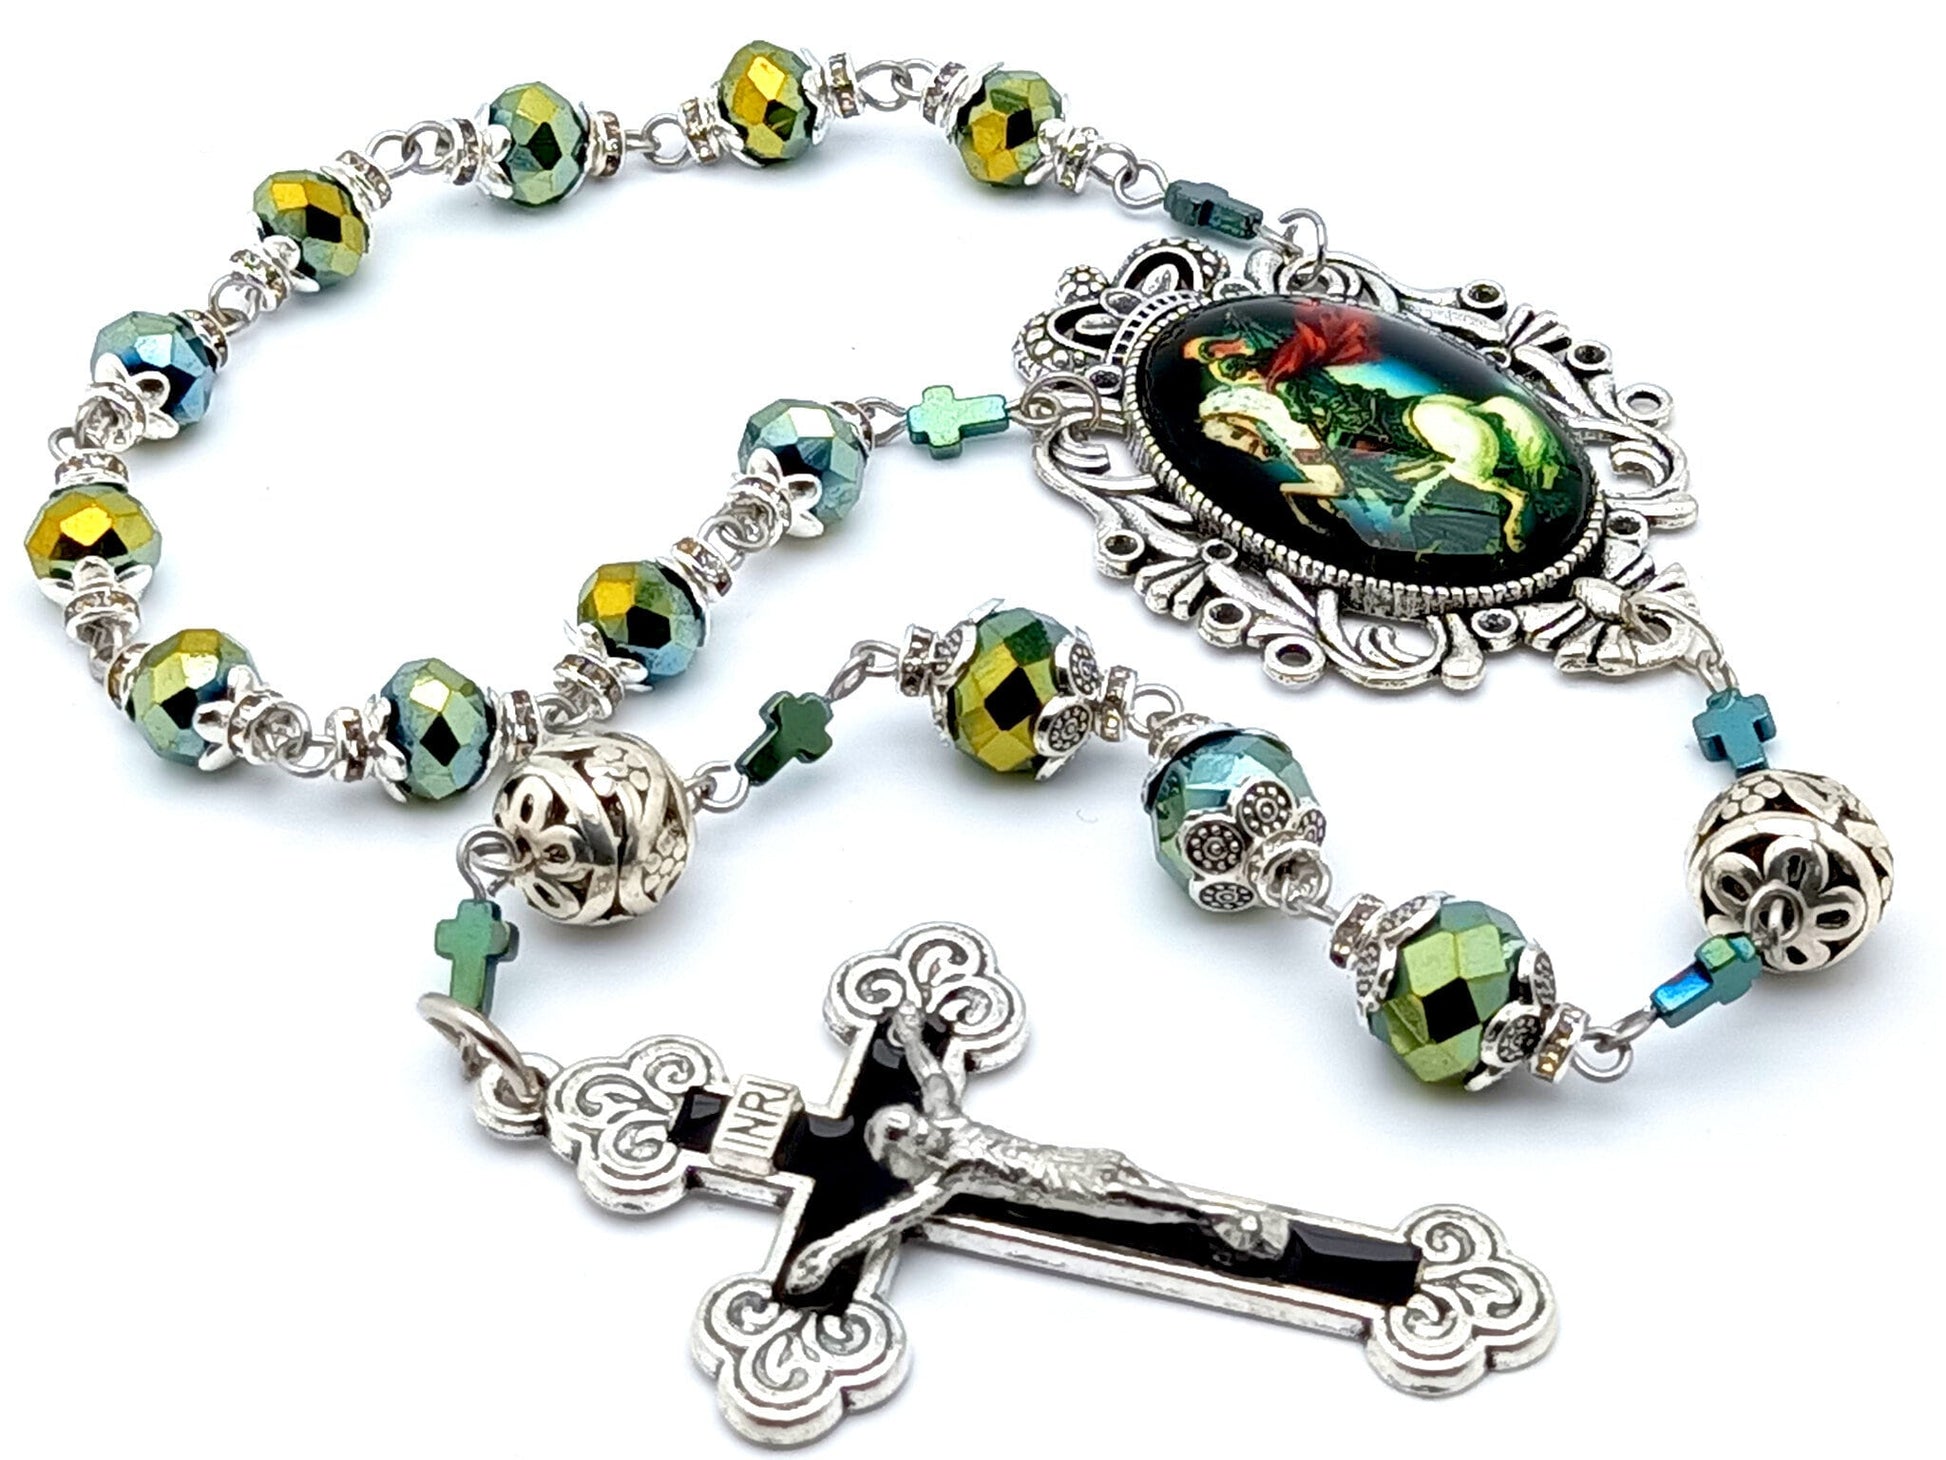 Saint George unique rosary beads single decade rosary with muli coloured faceted glass beads, black enamel crucifix and picture centre medal.